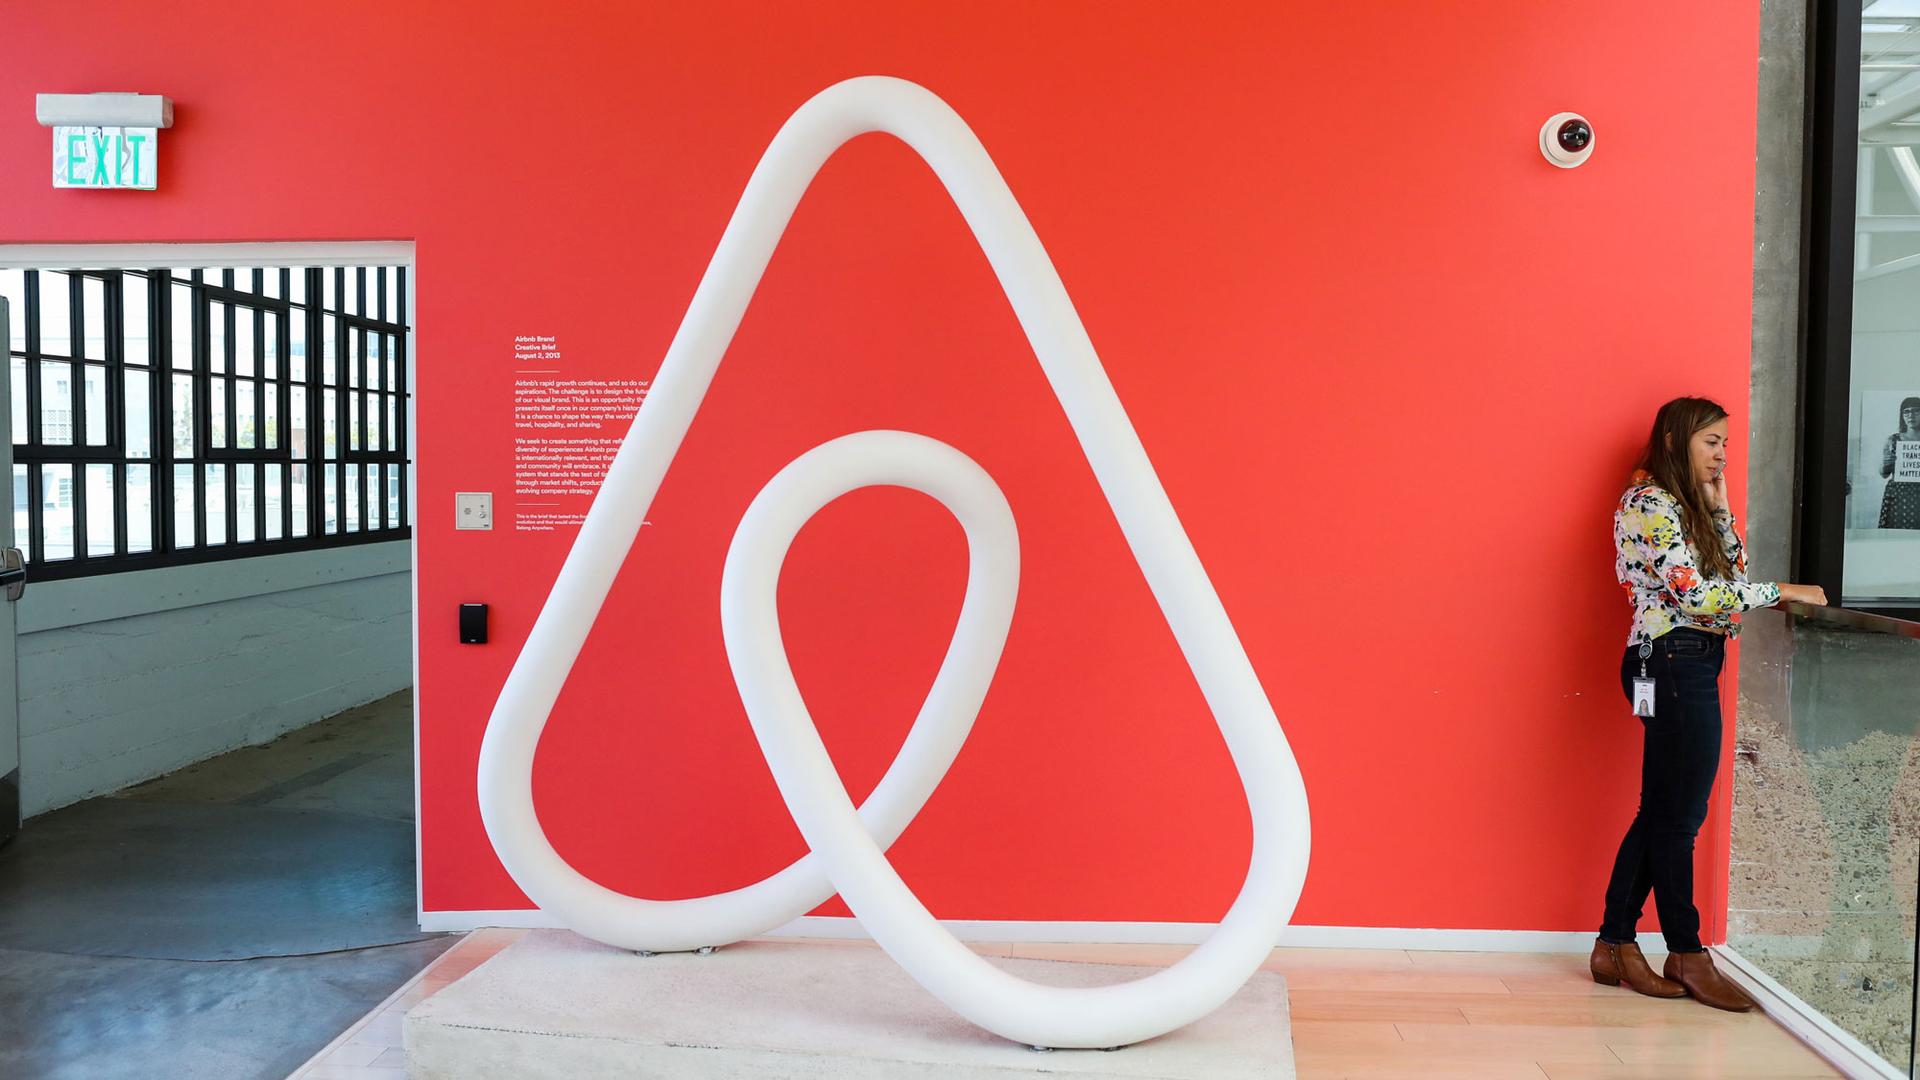 A woman is shown talking on the phone next to a red wall and a large sculpture of the Airbnb logo at the company's headquarters in San Francisco, California.